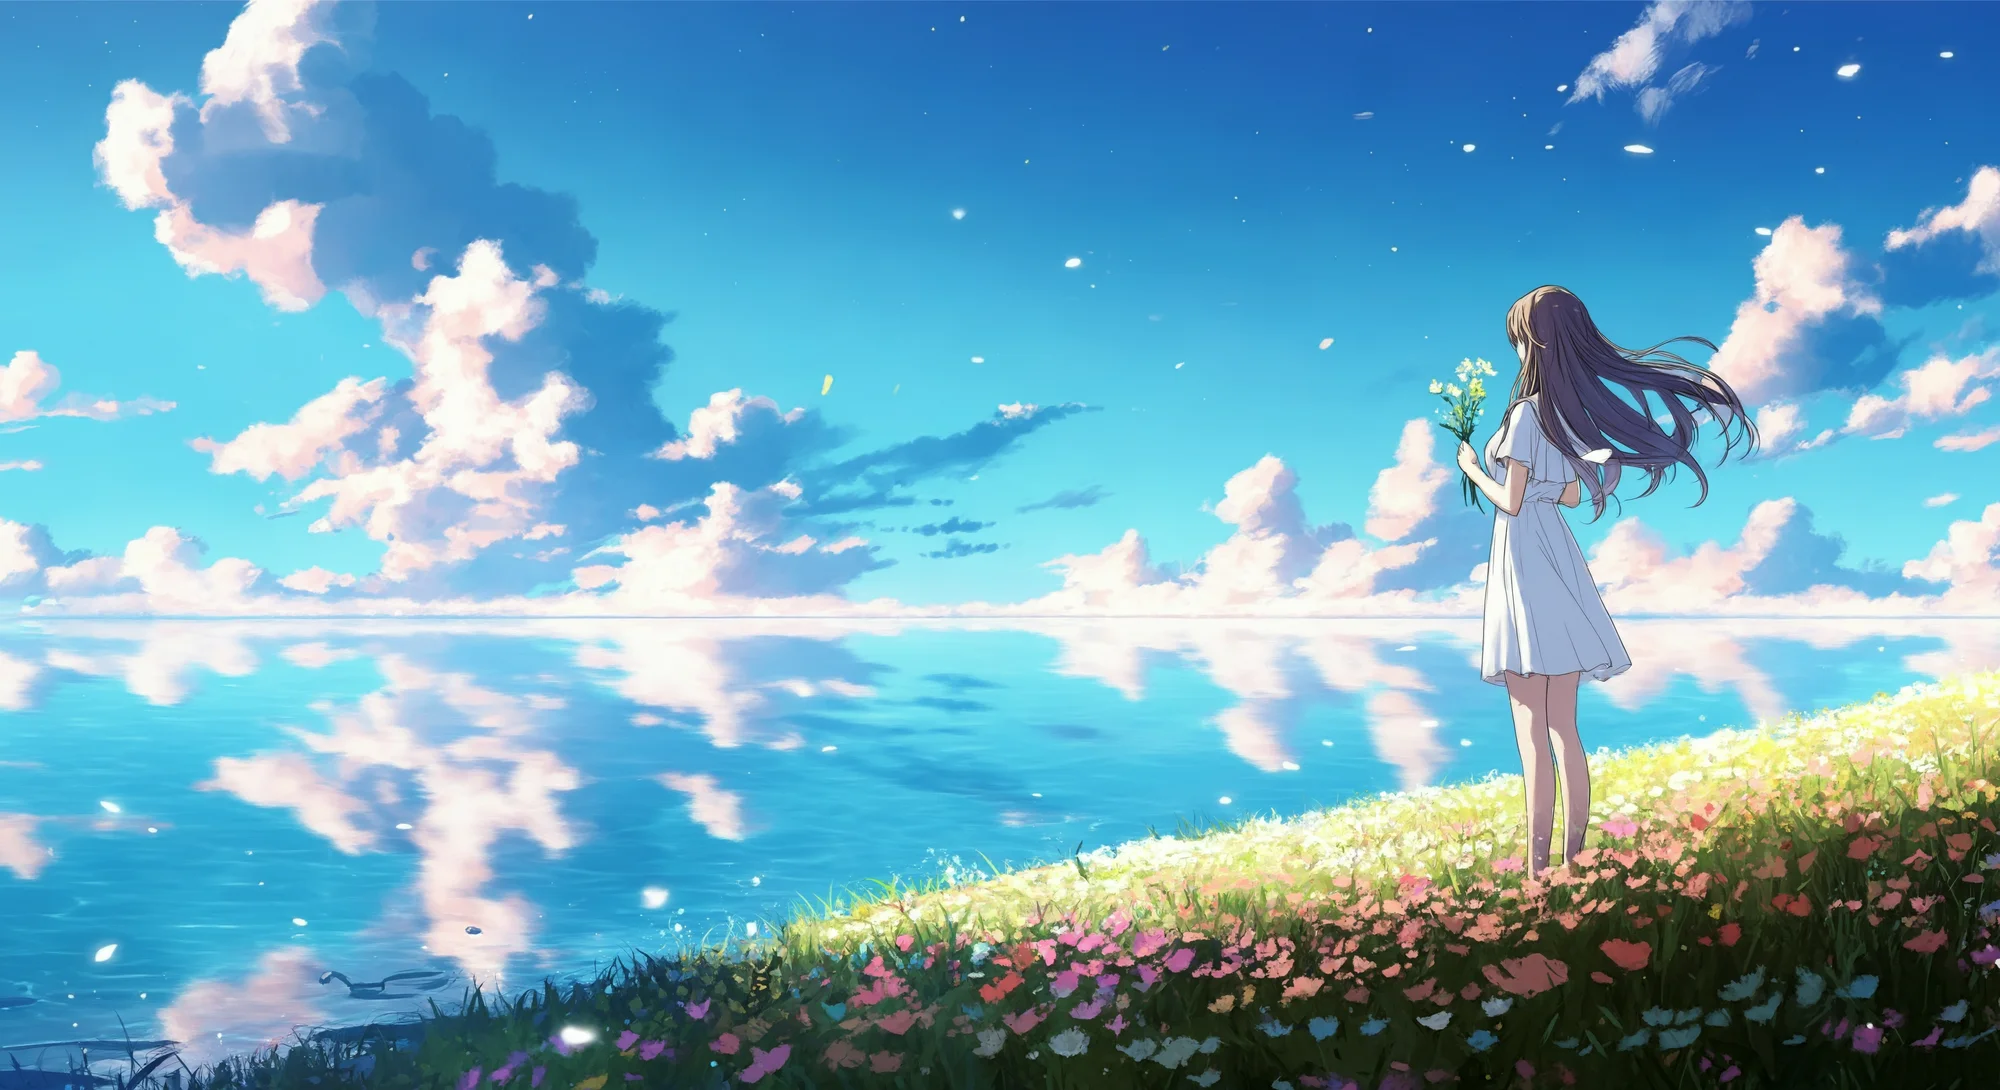 An image in the style of anime showing a girl in a white dress standing on the bank of an expansive lake, holding flowers and looking at the sky full of pink clouds. The sky is reflected by the water surface. Around her there are small hills covered in wildflowers.